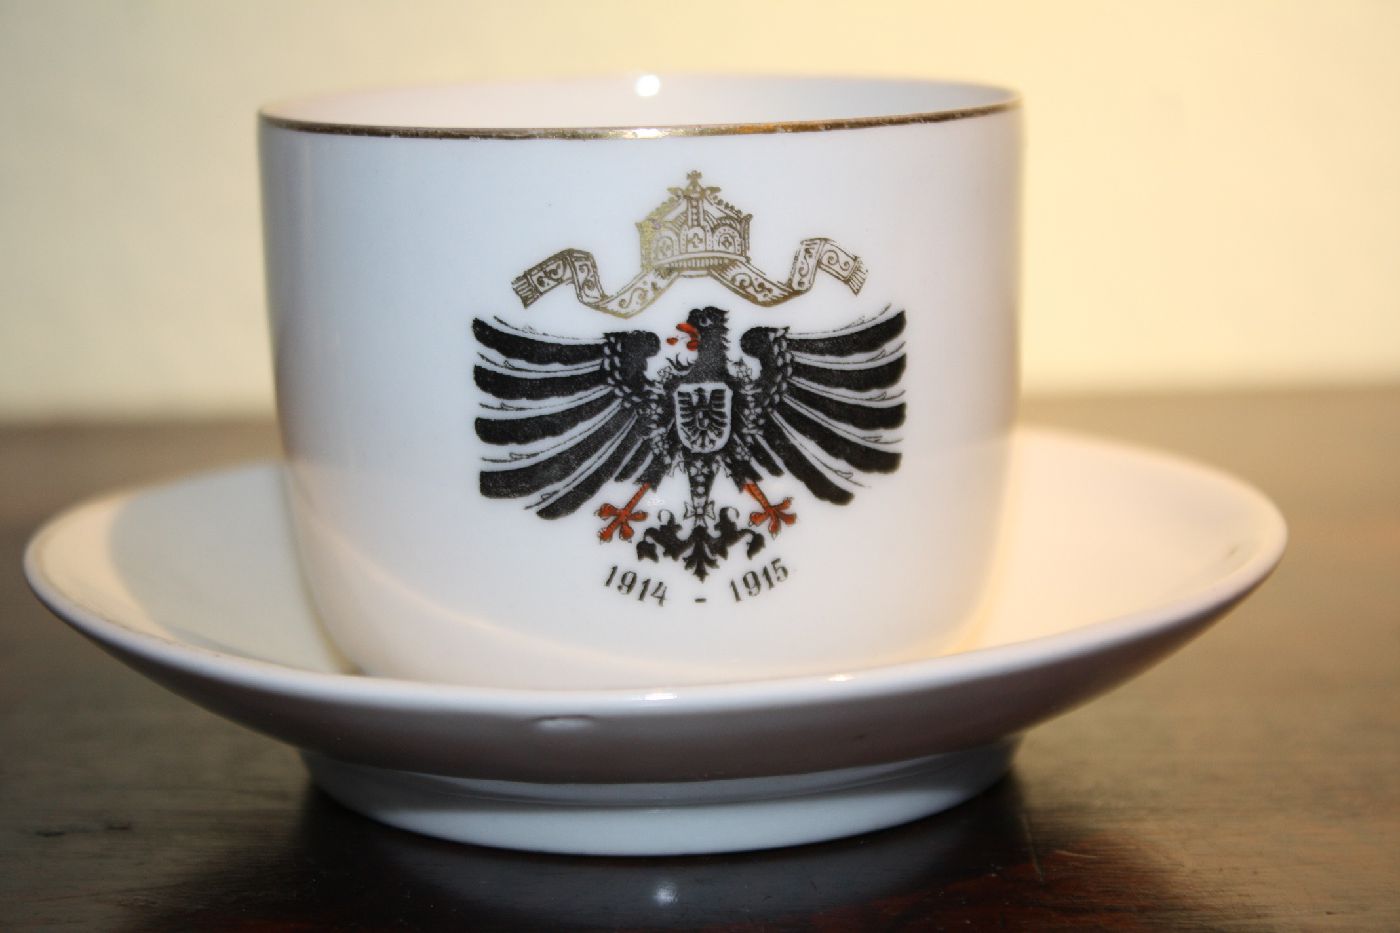 A German patriotic porcelain cup and saucer, black eagle with a crown and annual figures 1914-1915